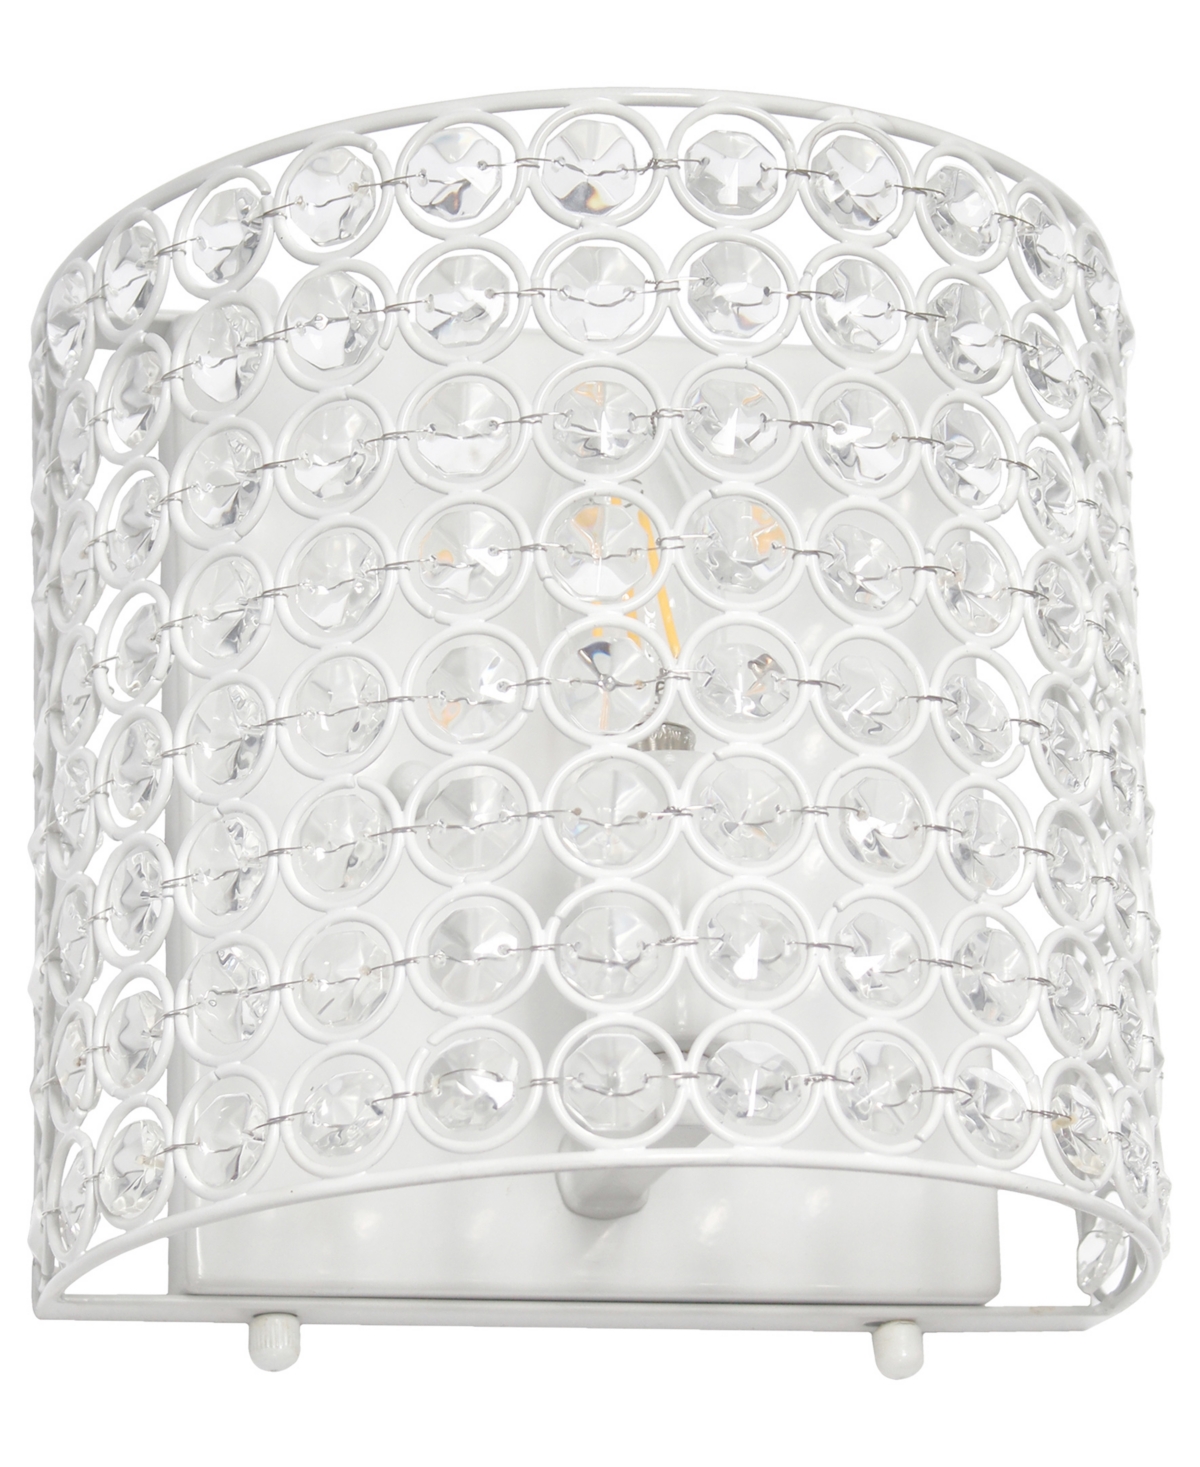 All The Rages 8" Modern Contemporary 1-light Bathroom Vanity Crystal And Metal Wall Sconce Lighting Fixture In White